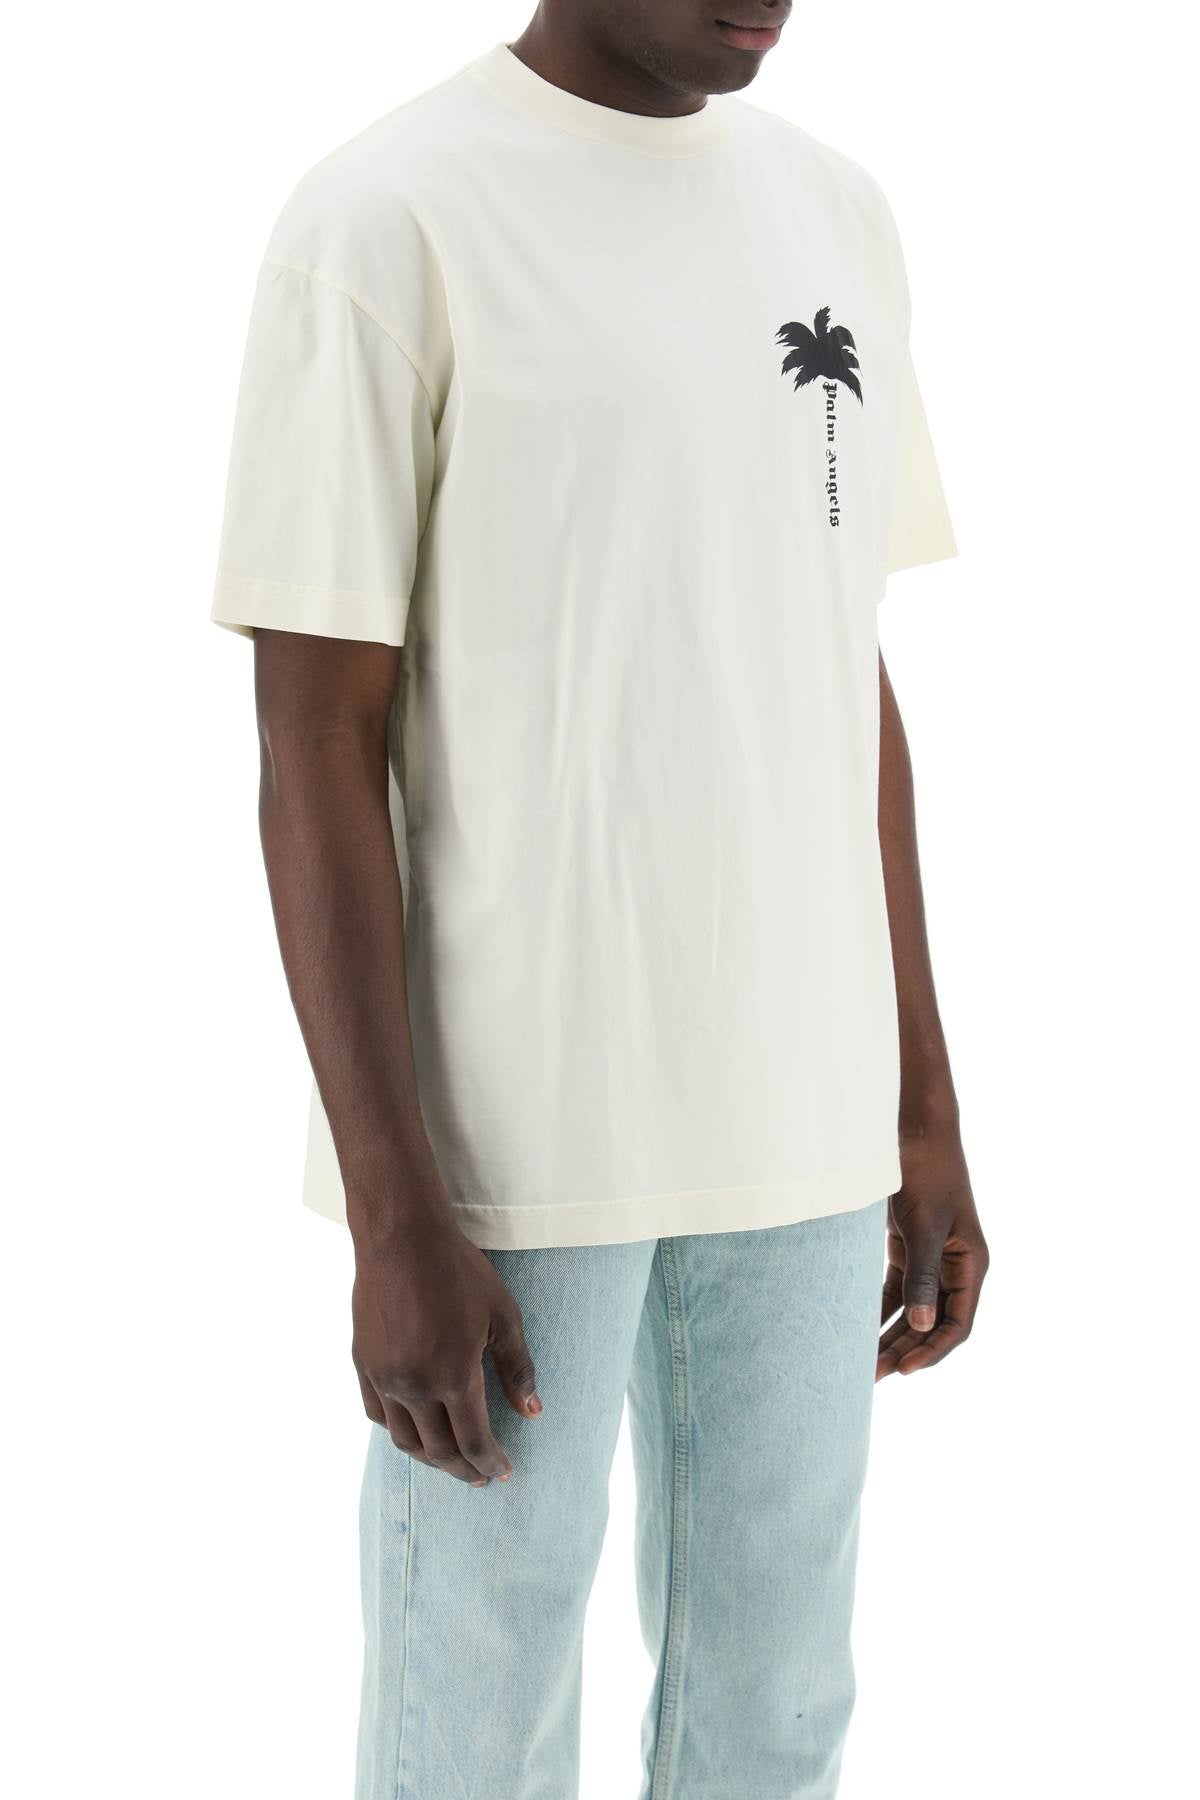 Palm angels palm tree graphic t-1